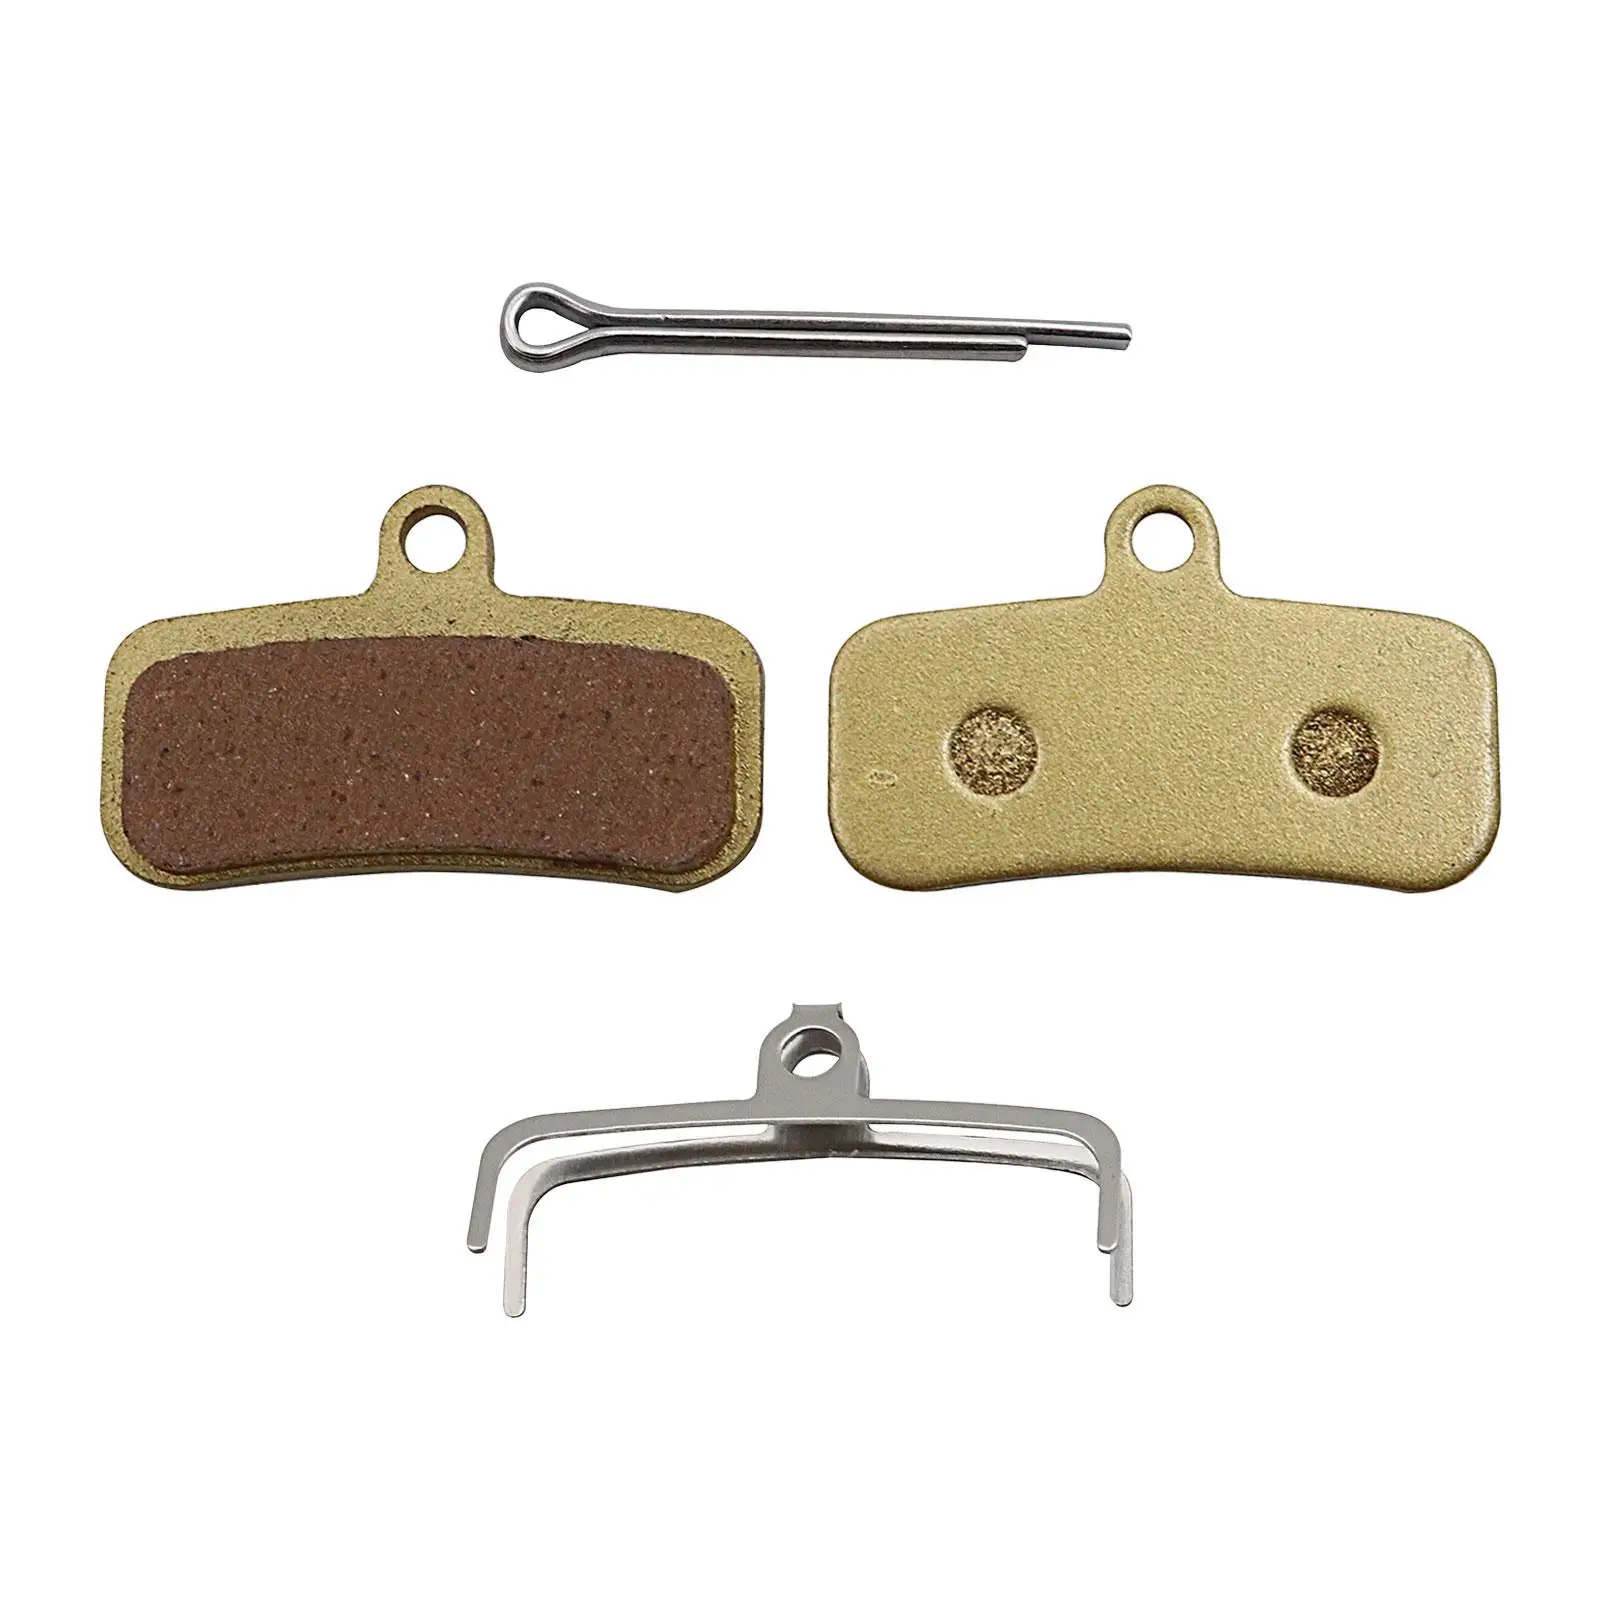 2 Pieces Motorcycle Front and Rear Brake Pads Motocross Modification Accessories for Surron Light Bee Replaces Professional